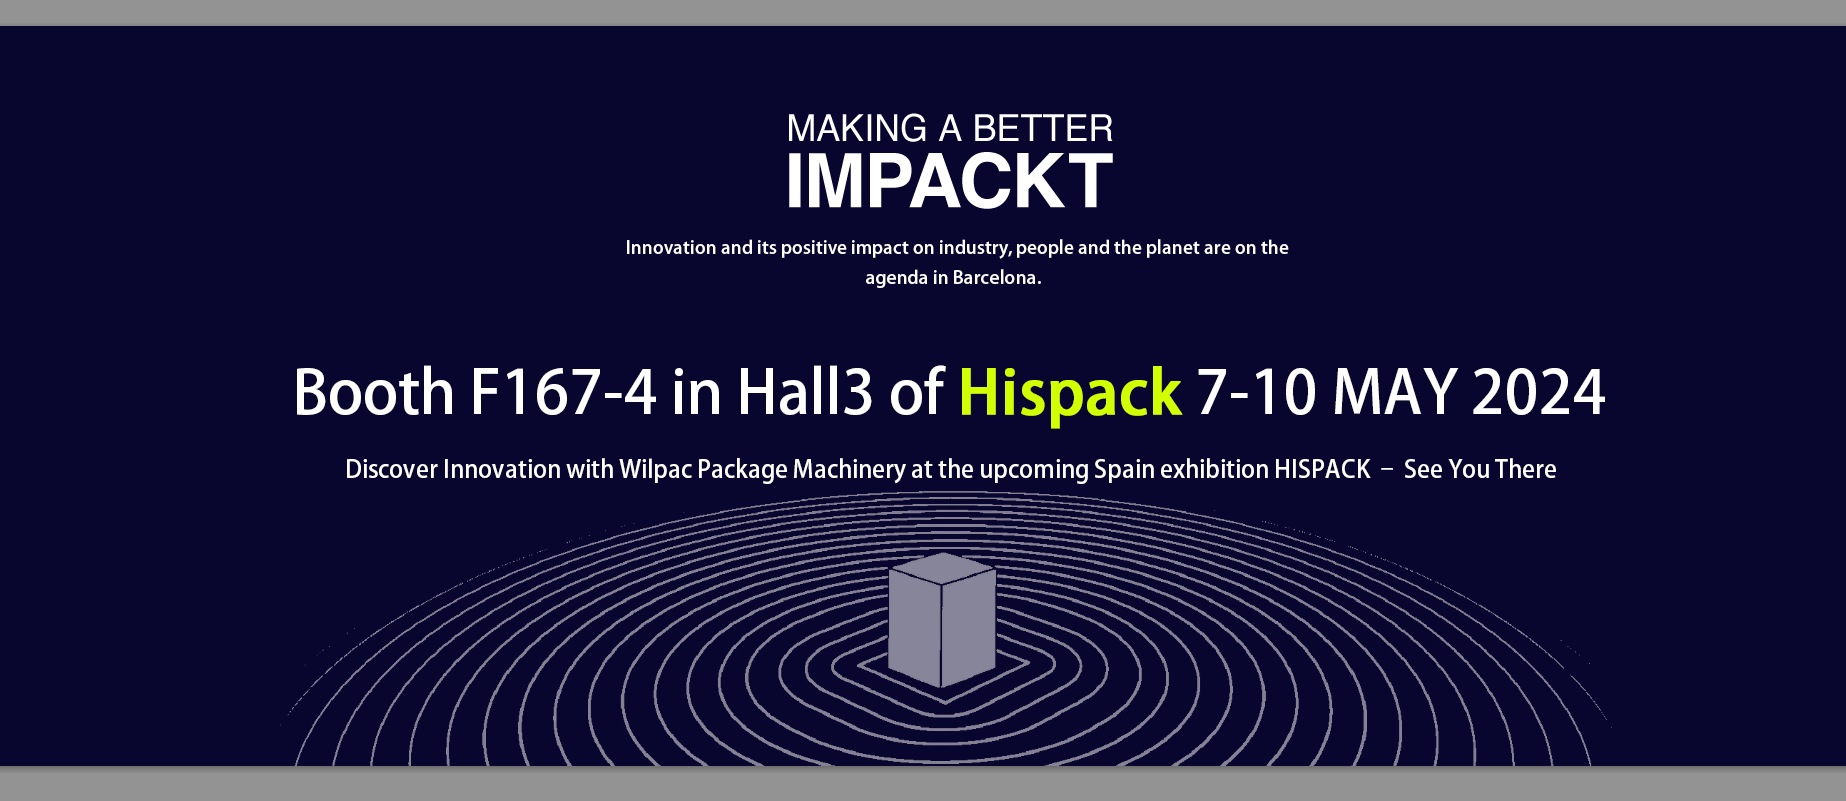 Welcome to Visit Wilpac Package Machinery at HISPACK 2024 in Spain